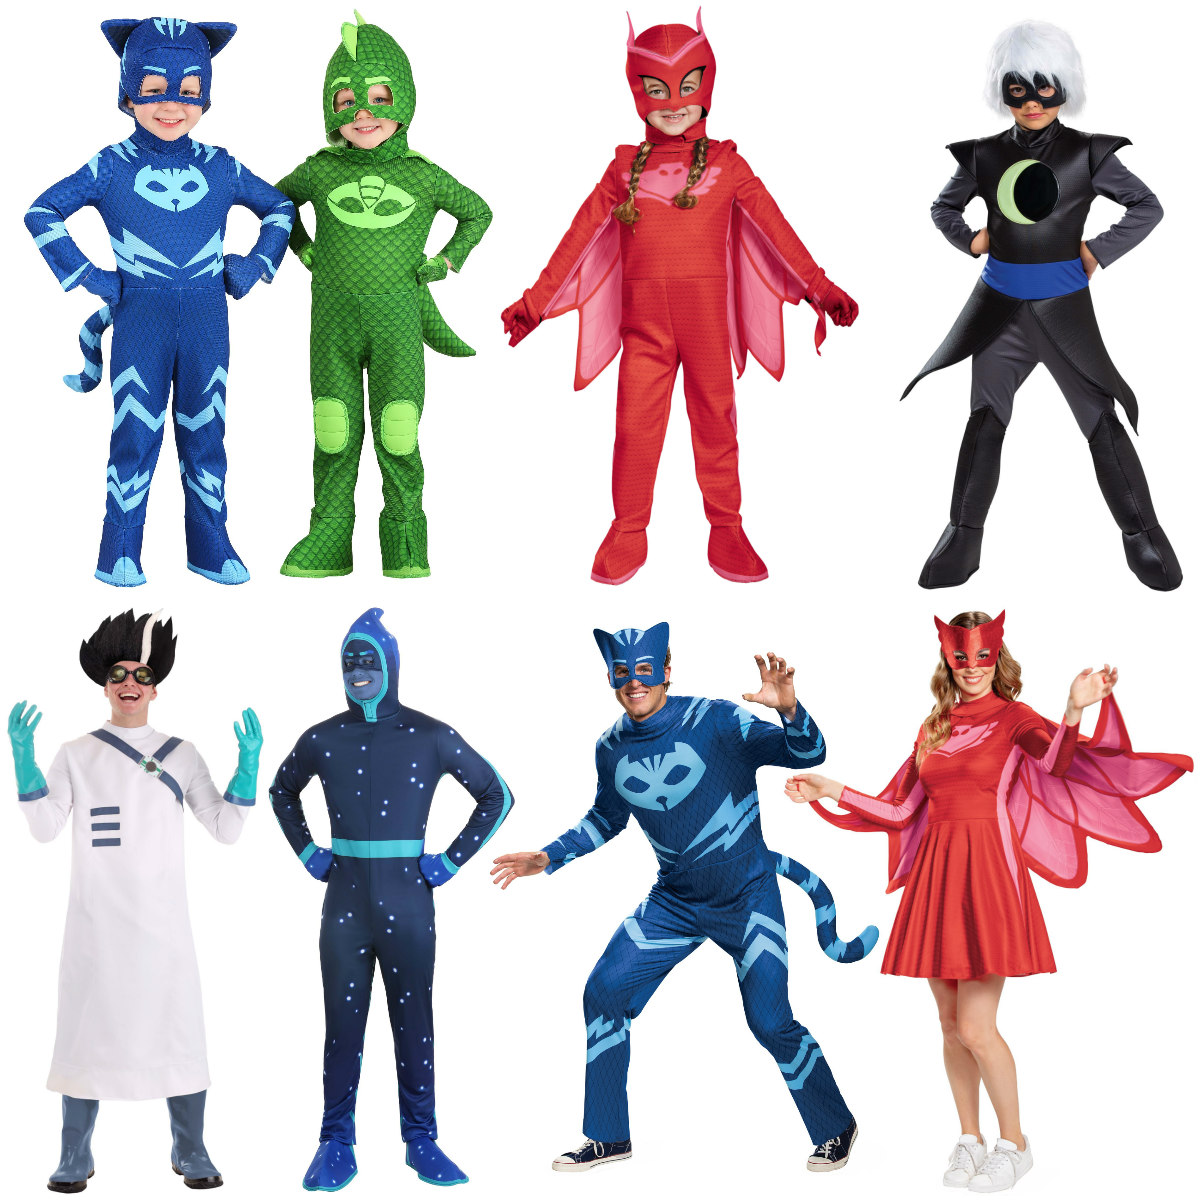 The Ultimate Cartoon Character Costumes for an Animated Saturday Morning  [Costume Guide]  Blog